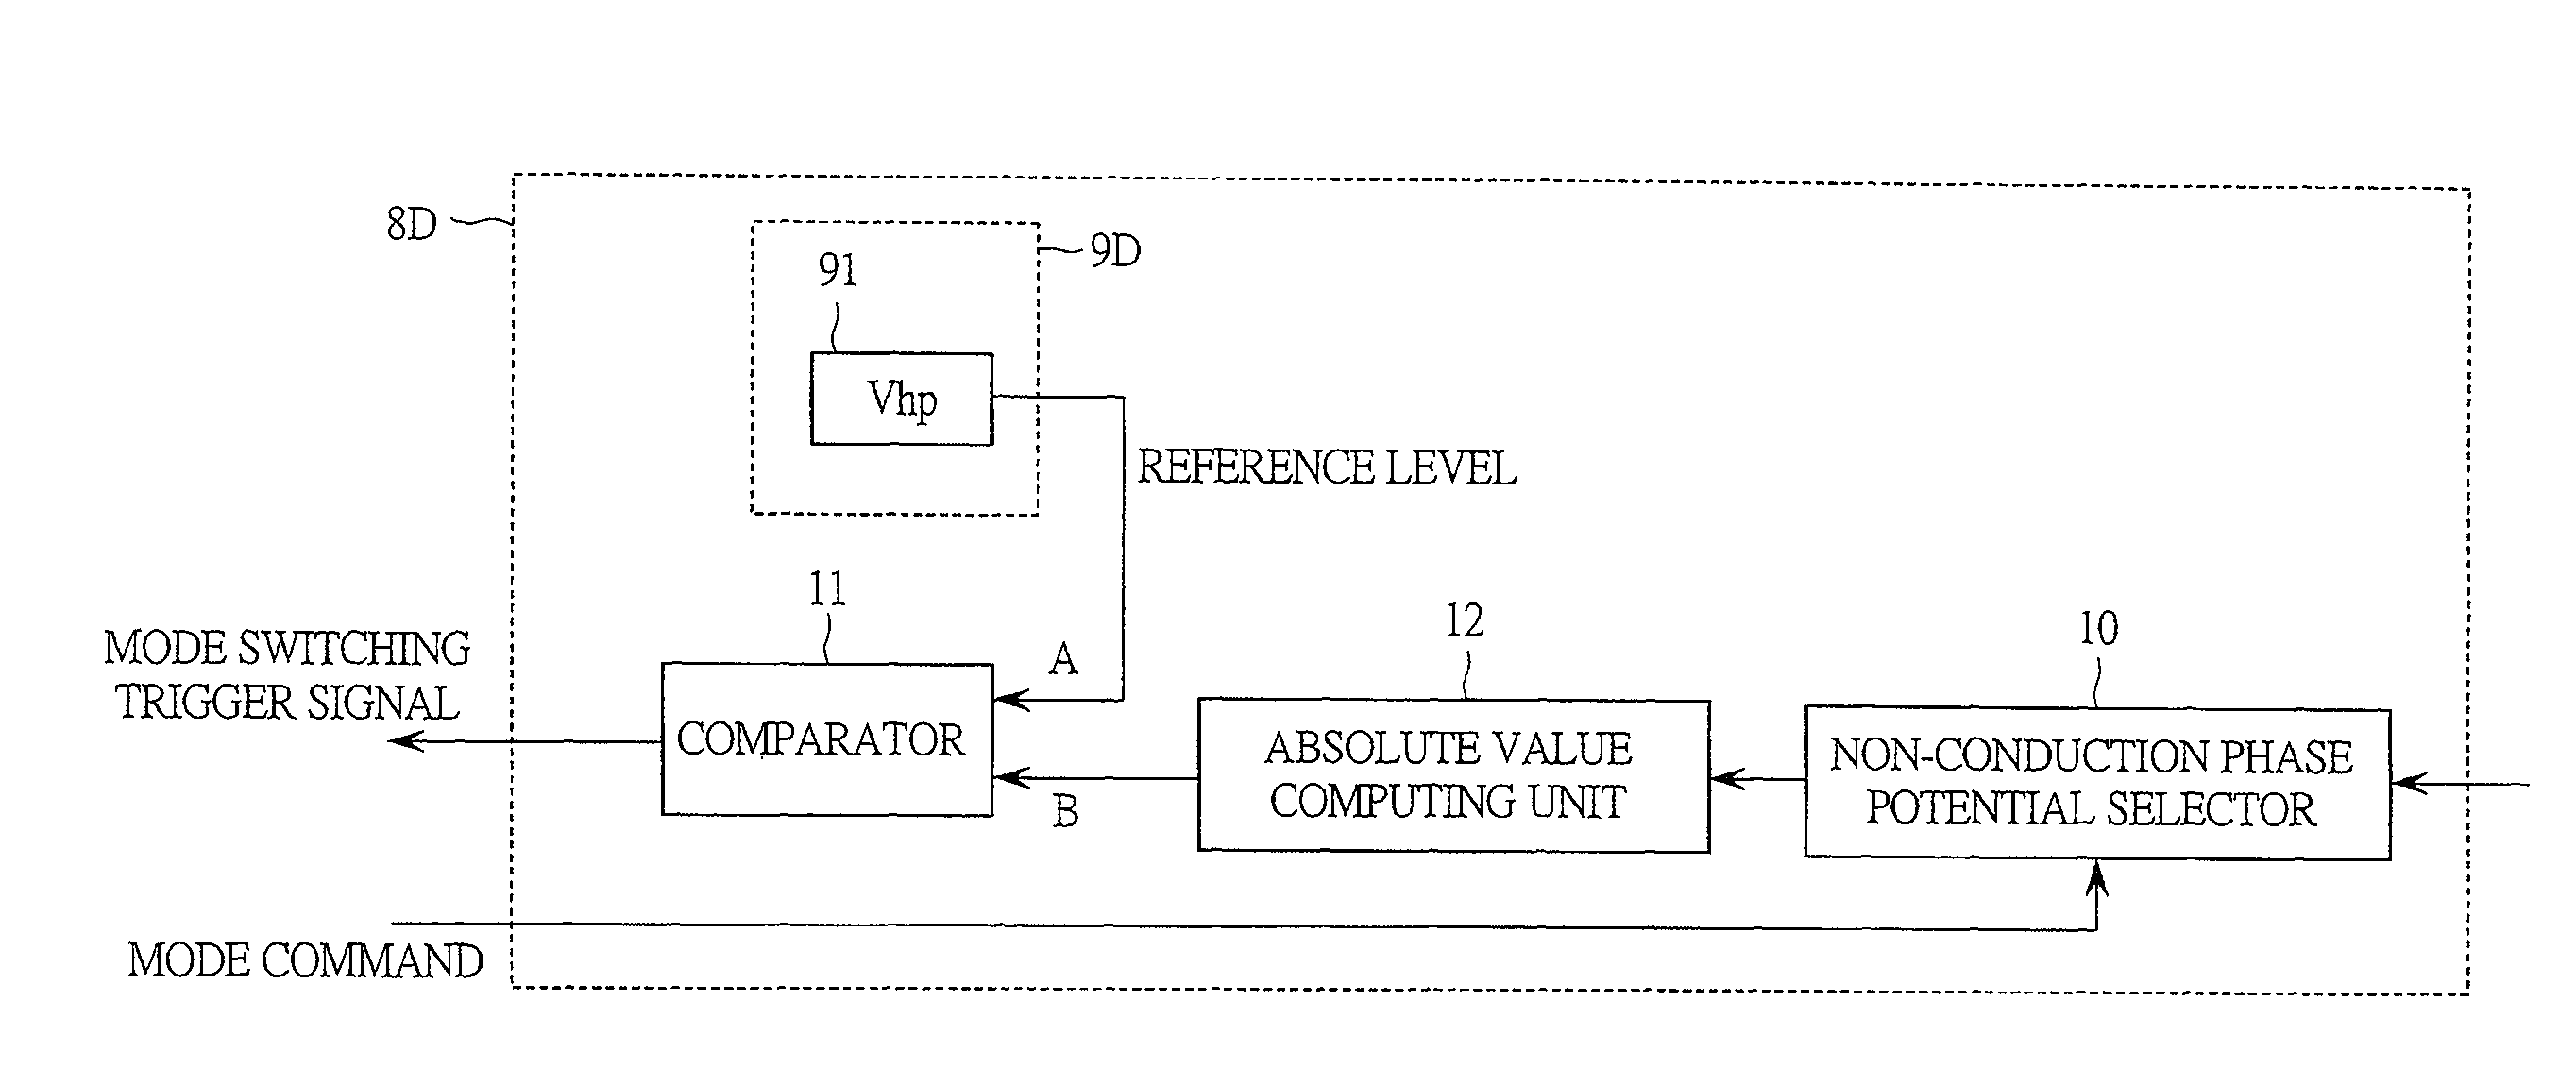 Drive system of synchronous motor